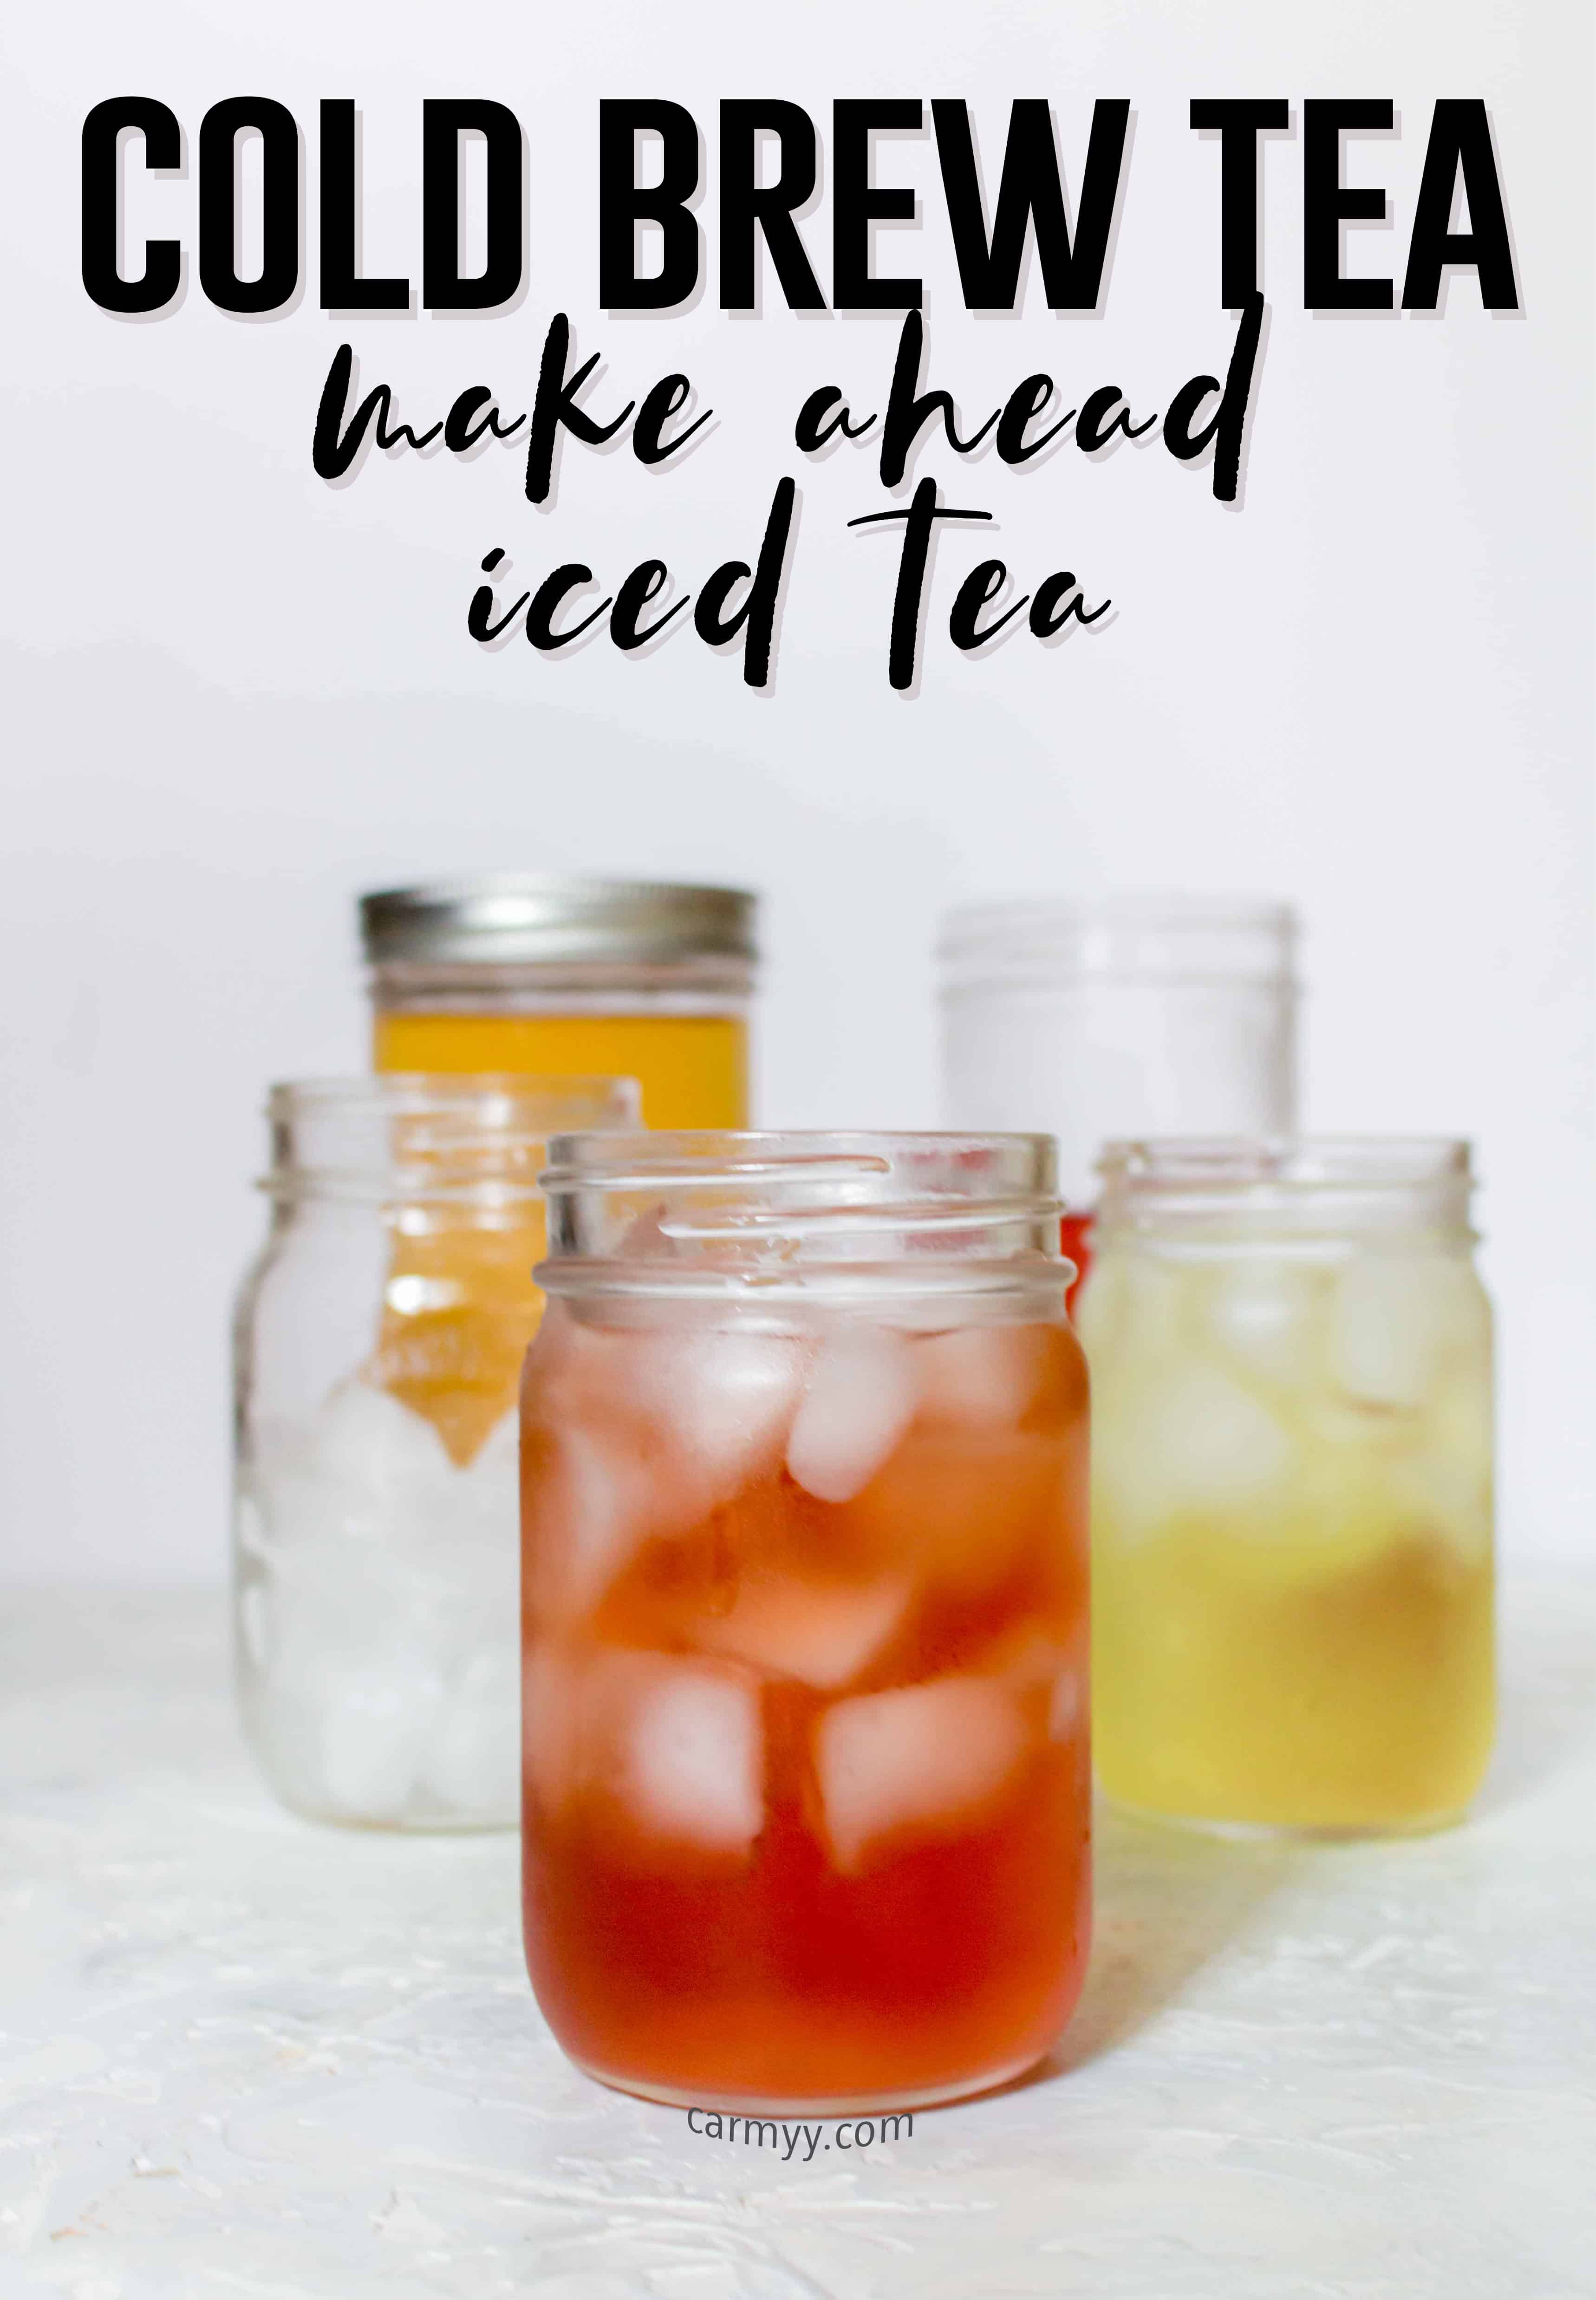 Cool down this summer with this make ahead cold brew iced tea method. Super simple, refreshing, and lasts up to 5 days in the fridge! 